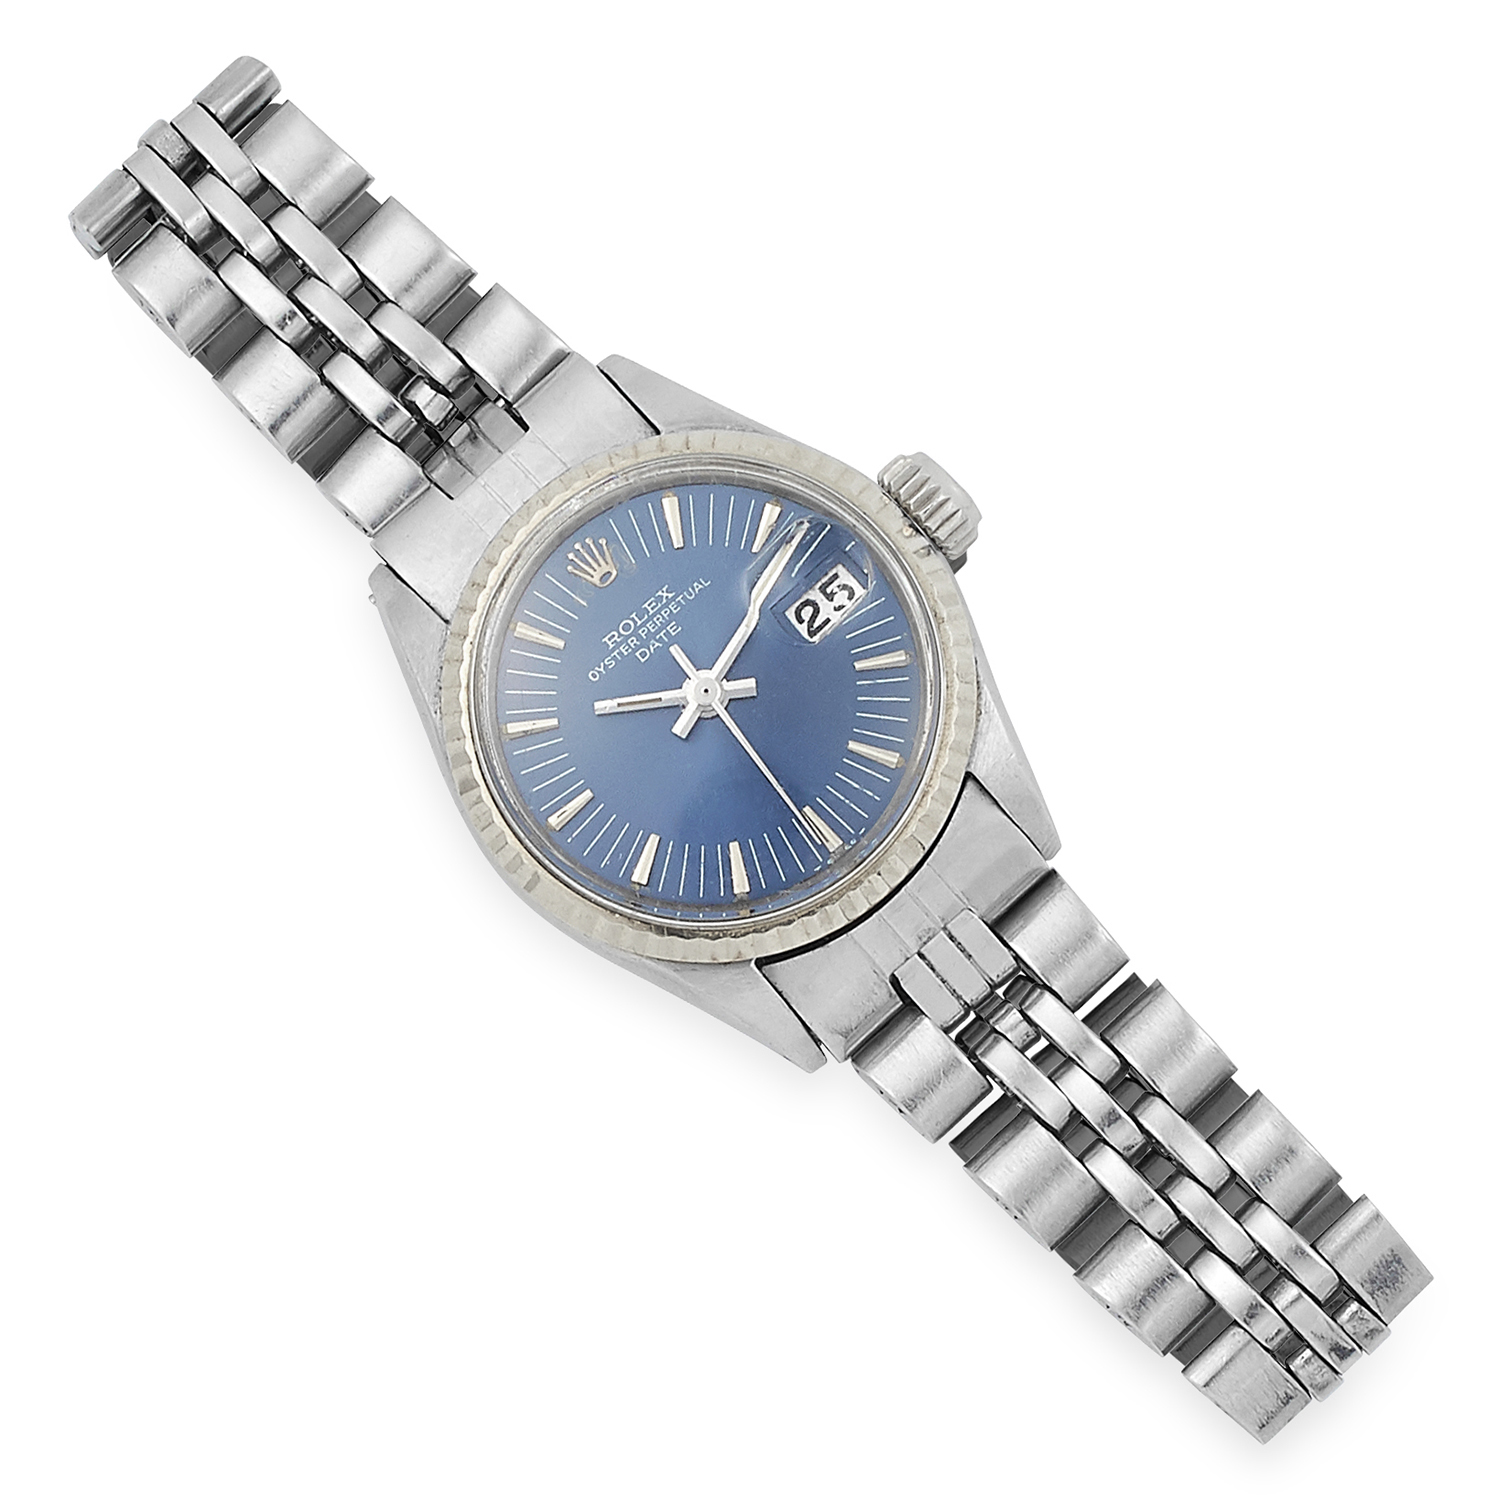 LADIES OYSTER PERPECTUAL WRISTWATCH, ROLEX with blue dial, 38.1g.